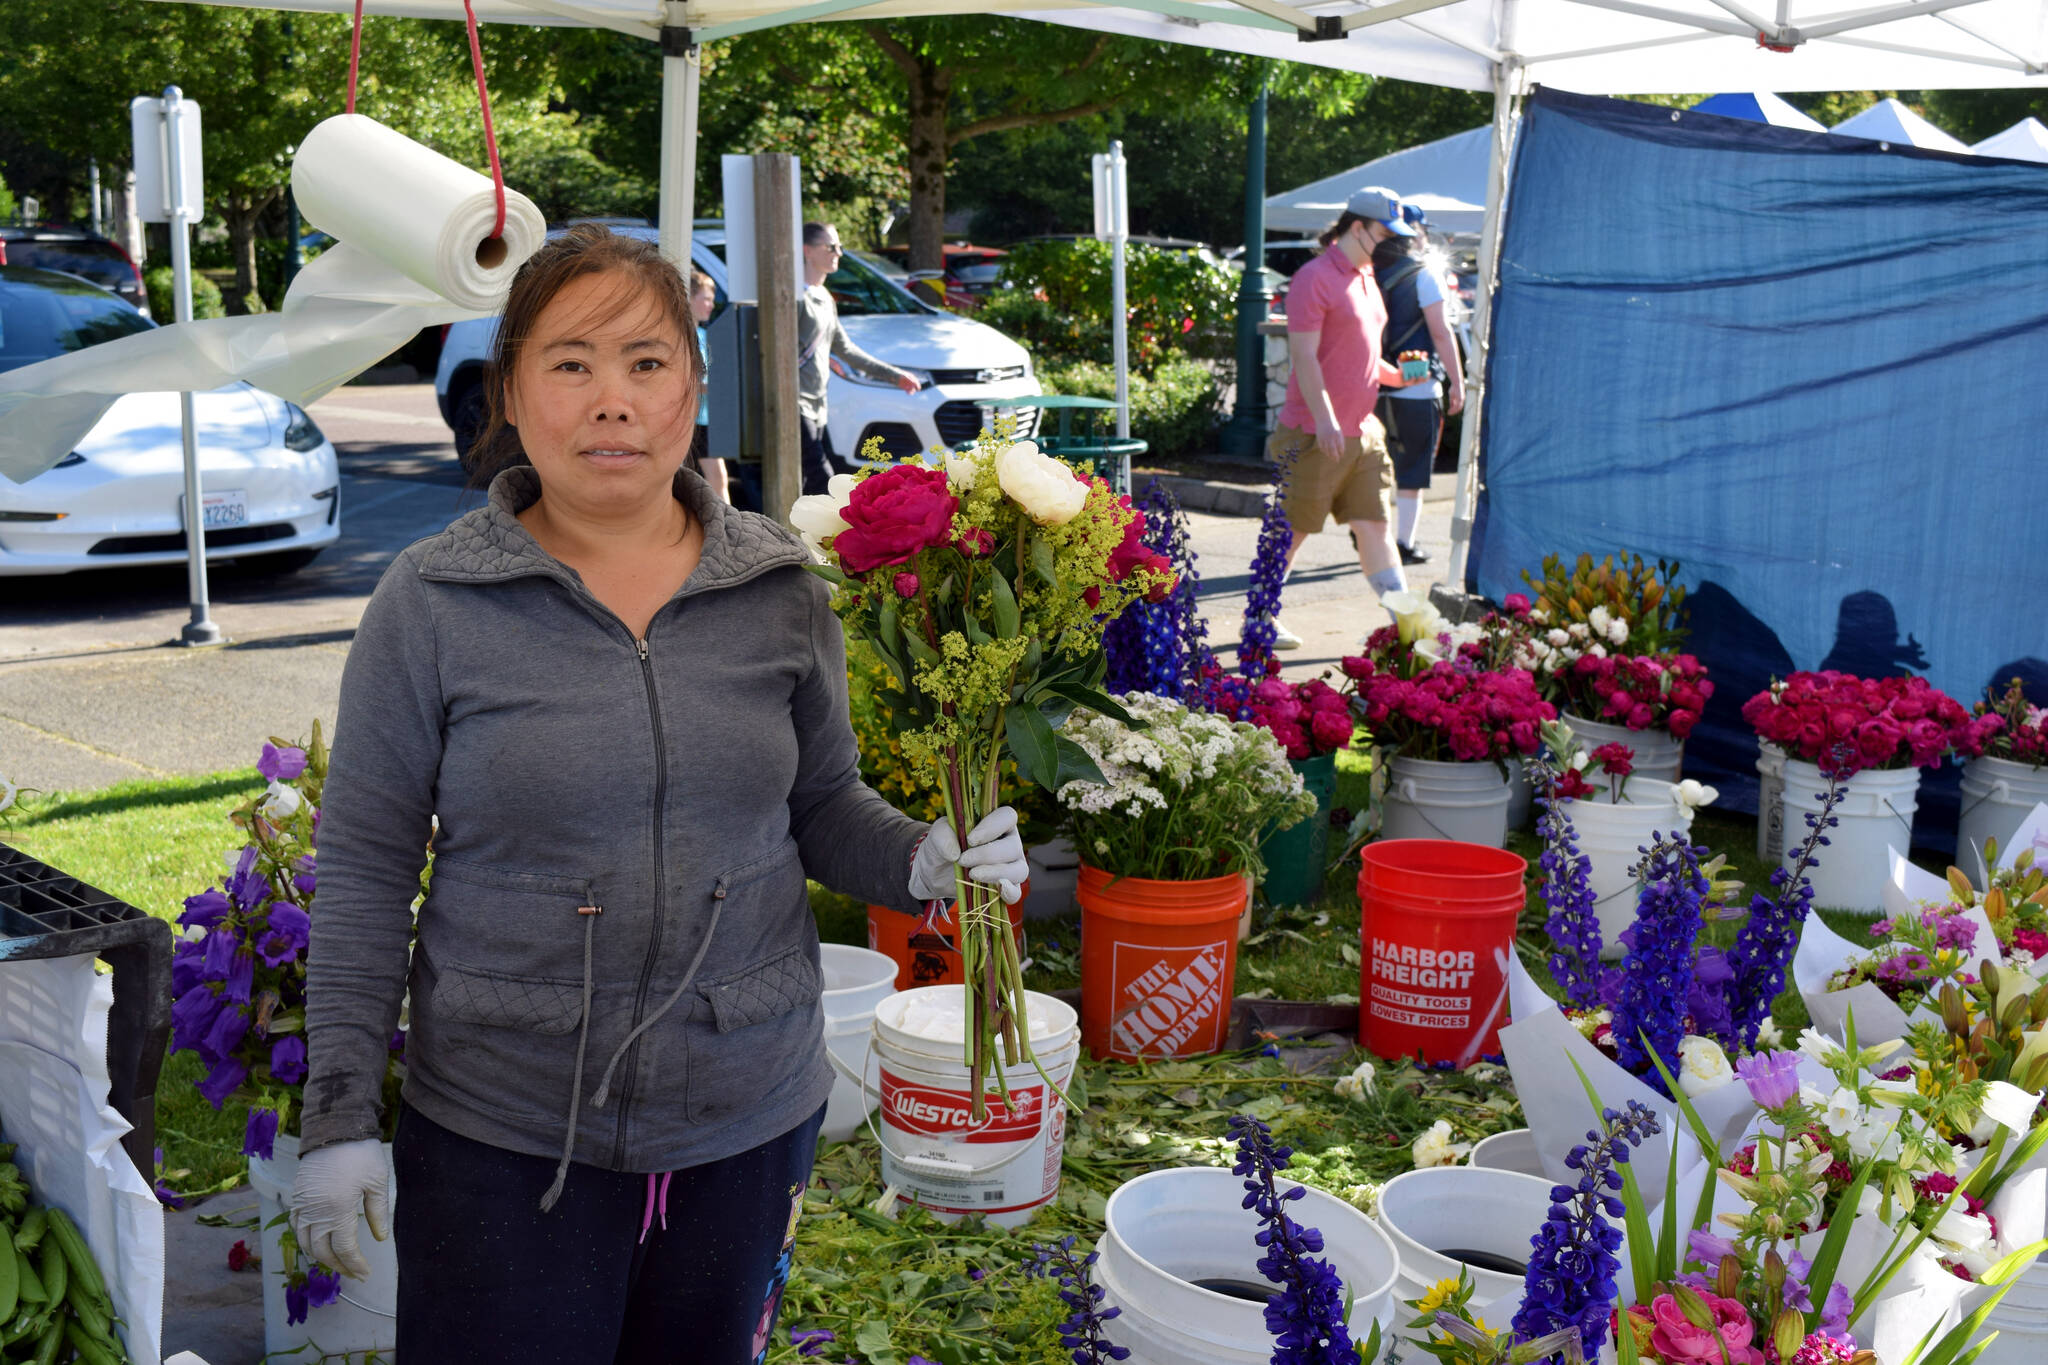 A vendor at The North Bends Farmers market poses with their flowers on June 23.